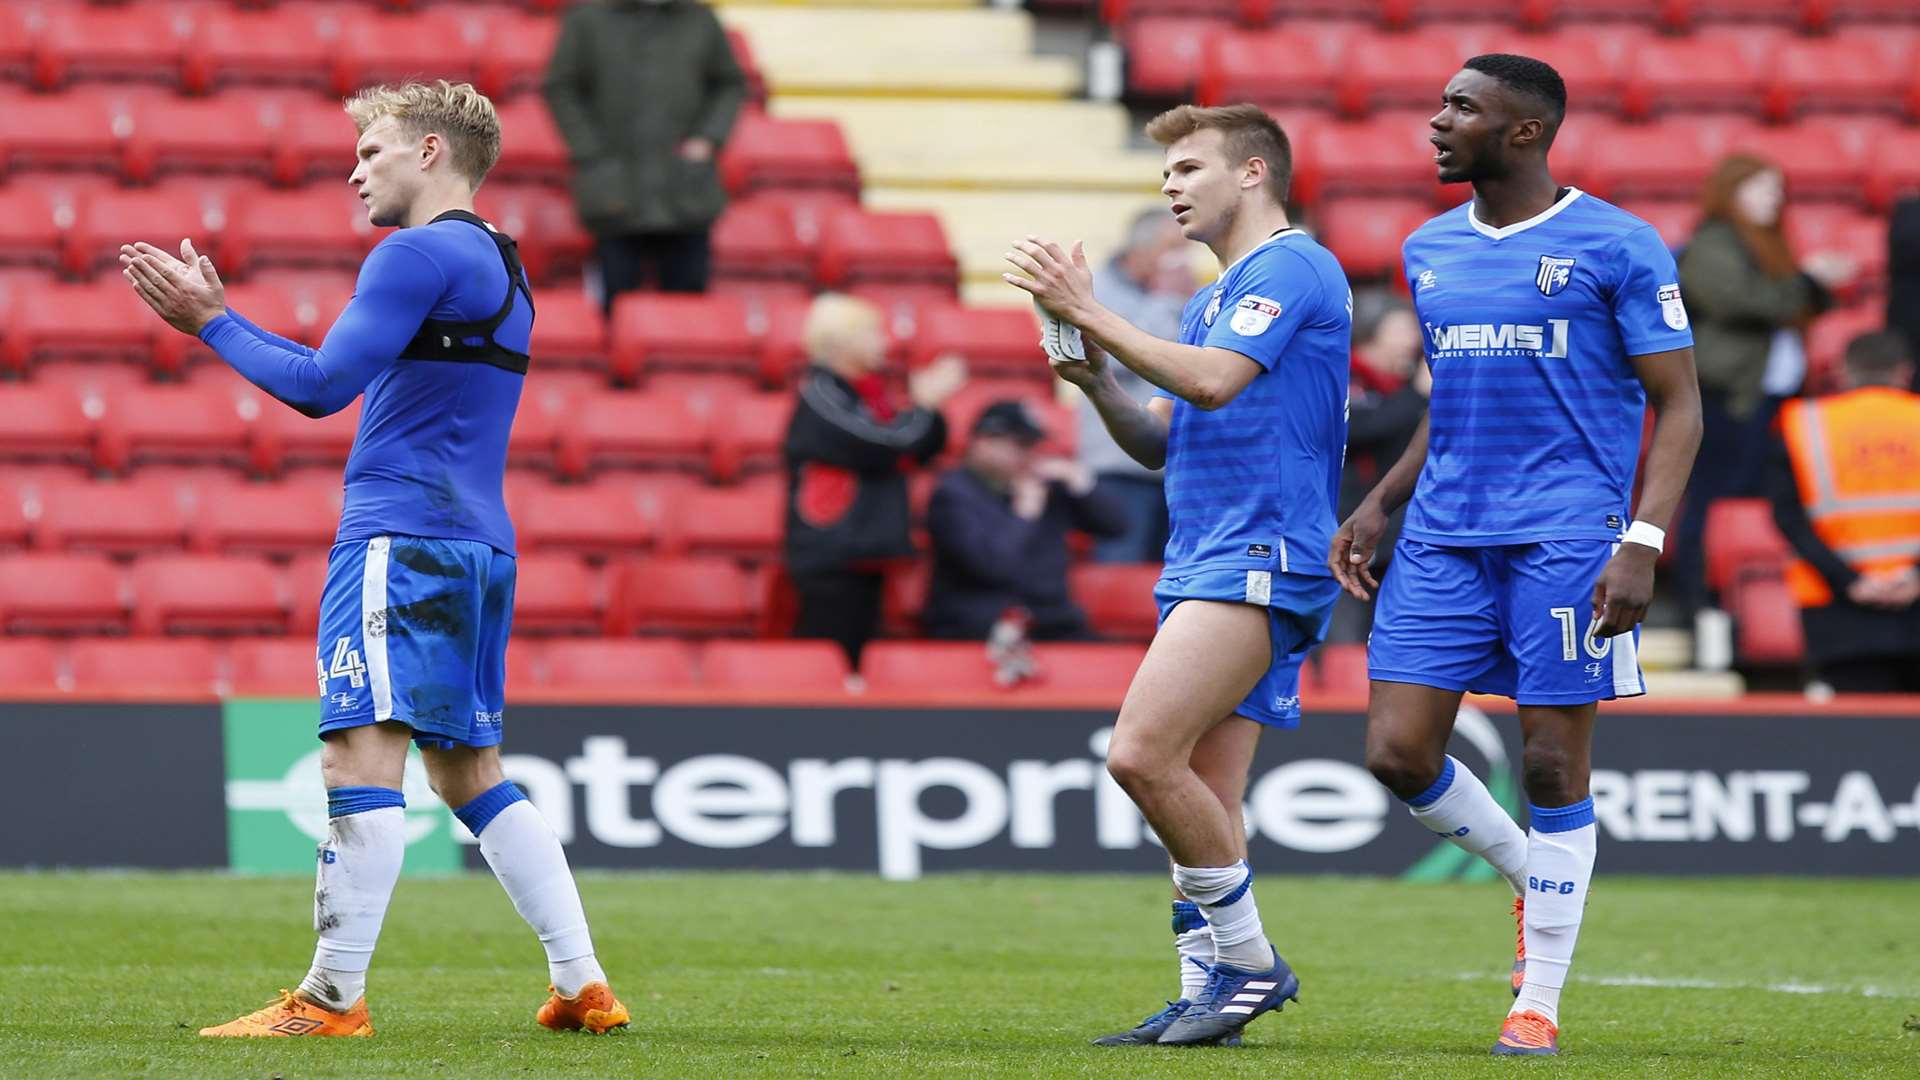 Josh Wright, Jake Hessenthaler and Emmanuel Osadebe thanks the Gills faithful for their support at the final whistle Picture: Andy Jones